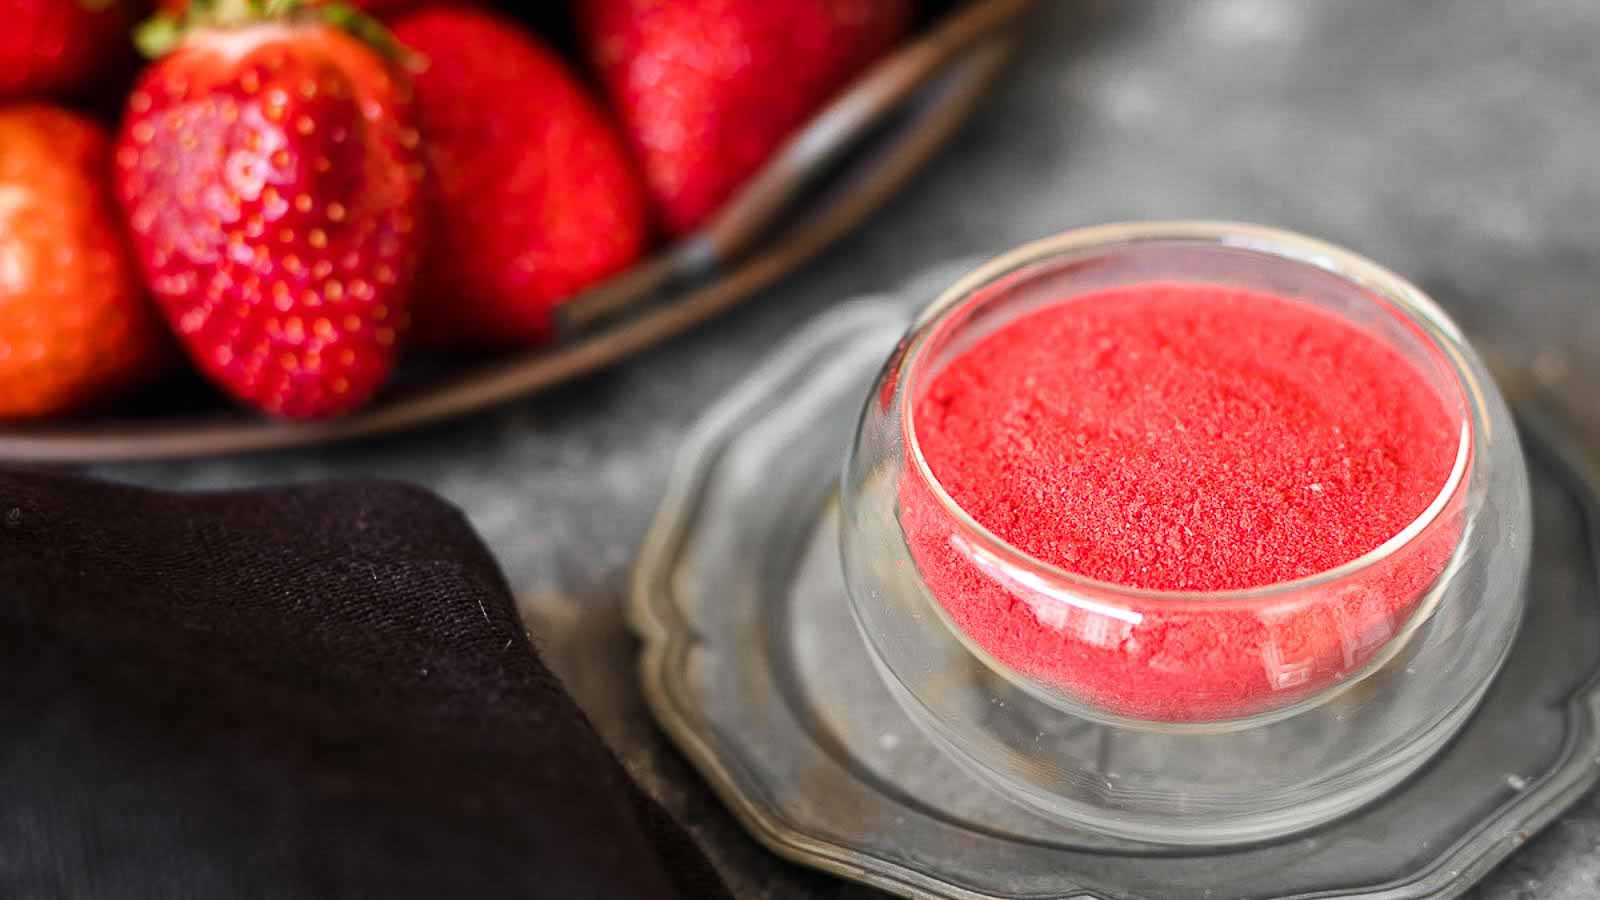 Strawberry Powder in a glass bowl with fresh strawberries behind.